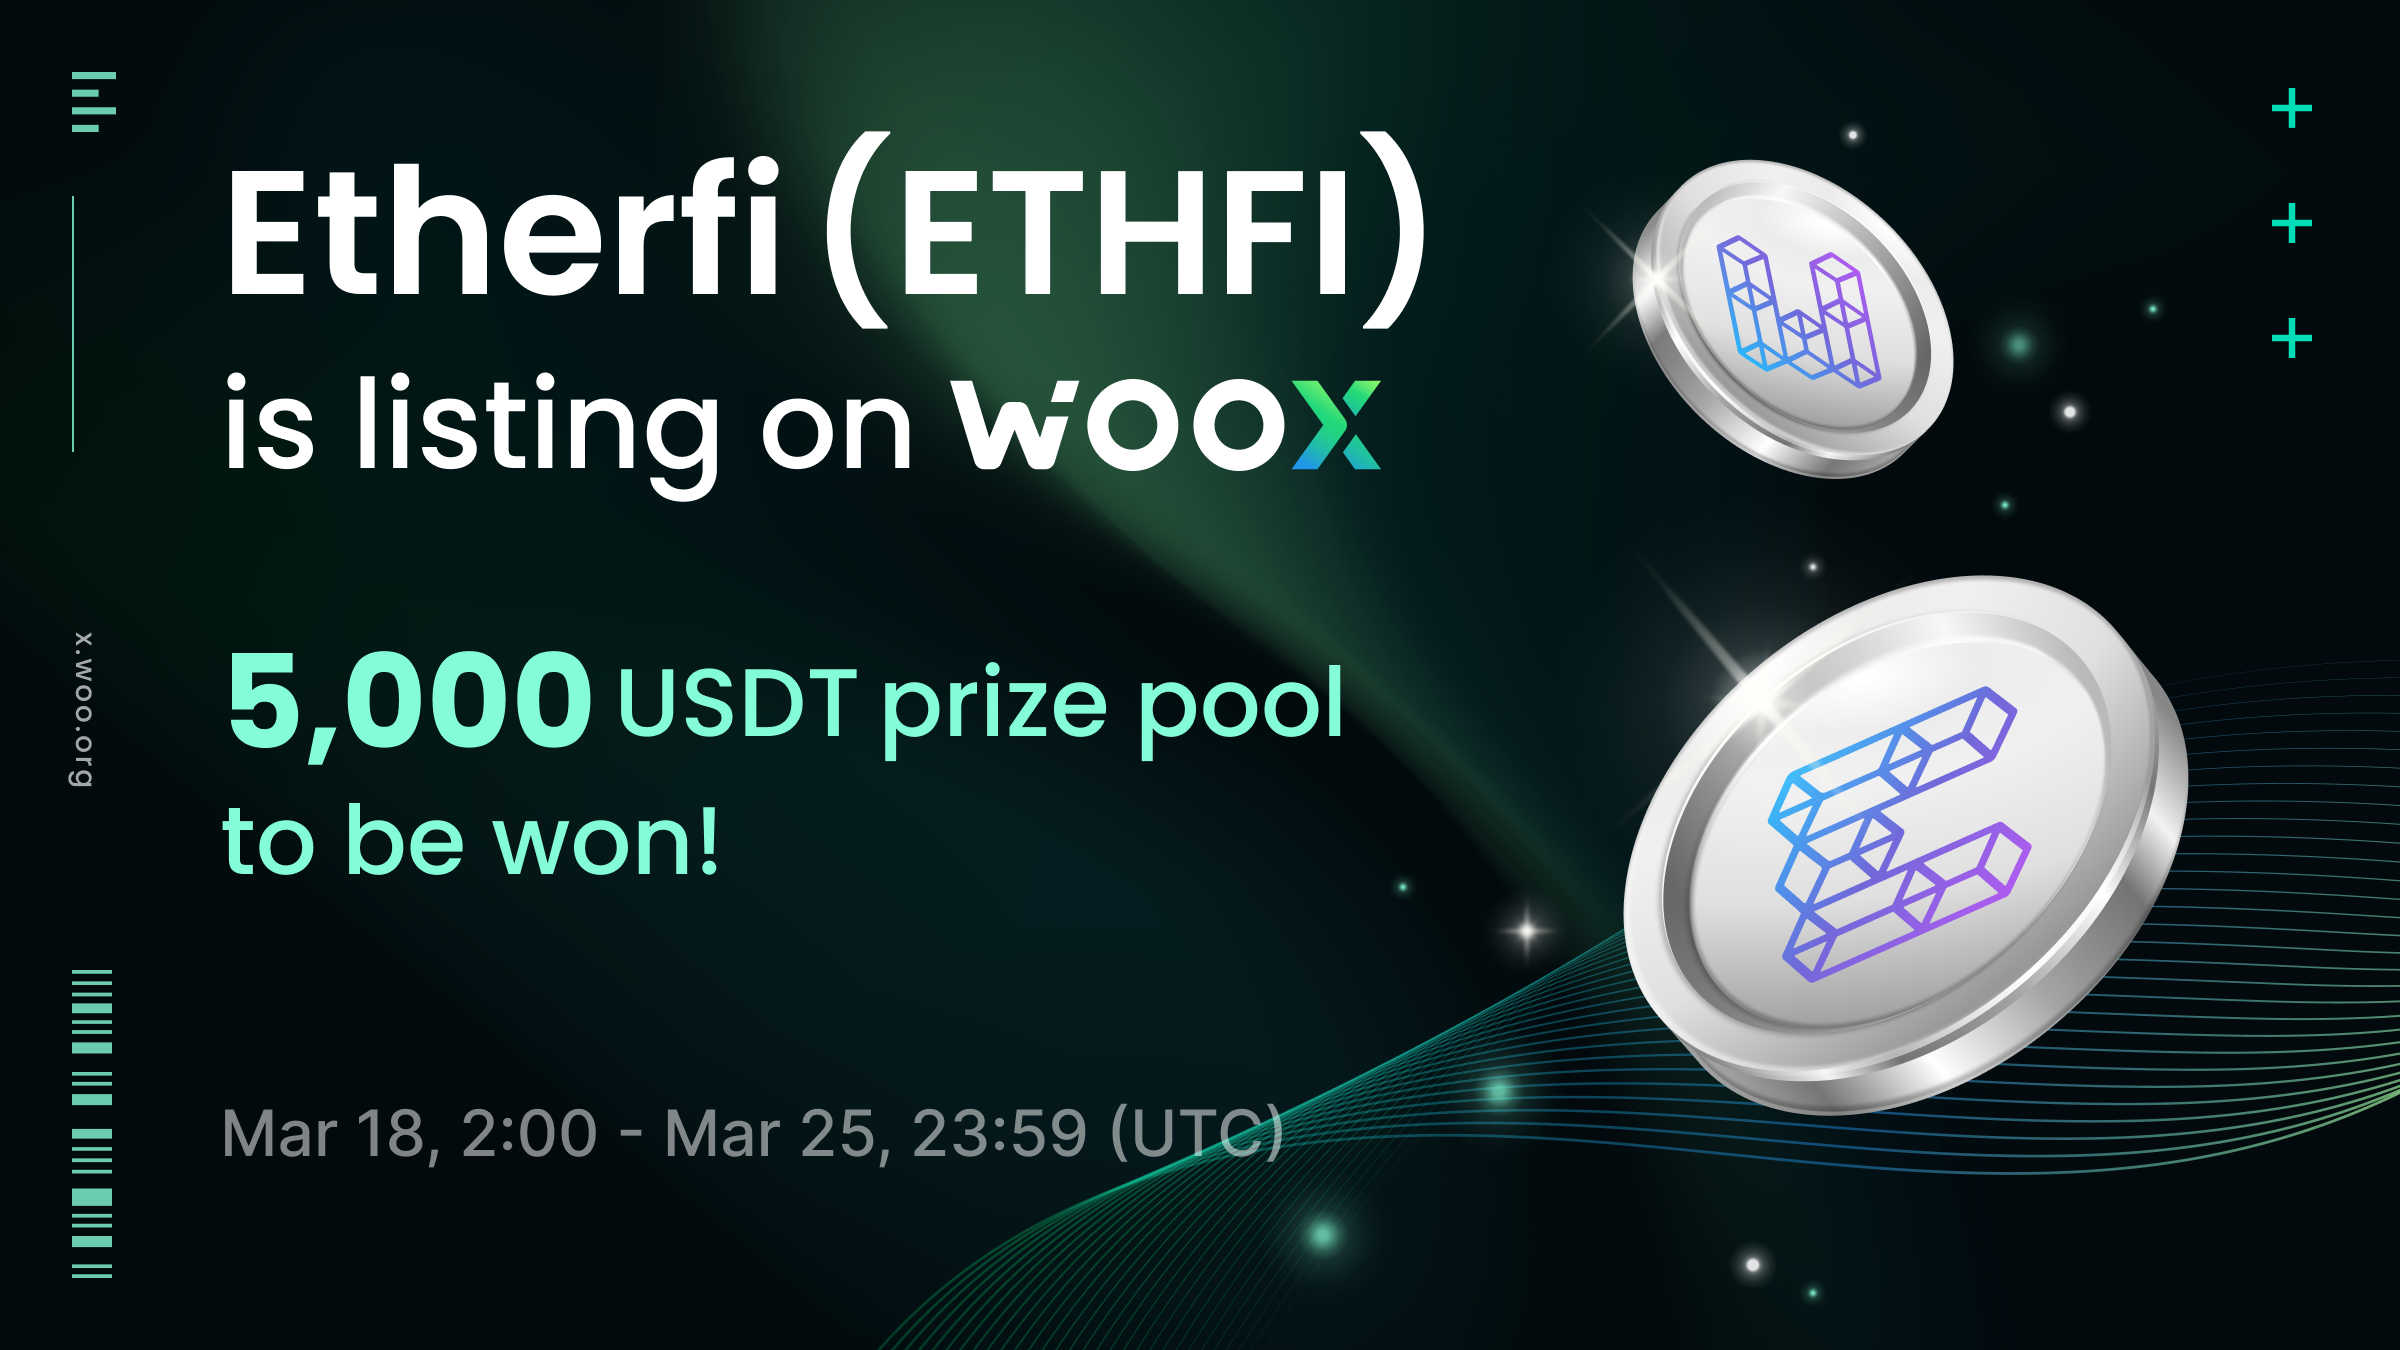 New Listing: Etherfi (ETHFI) on WOO X - Trade and share a 5,000 USDT prize pool!!!